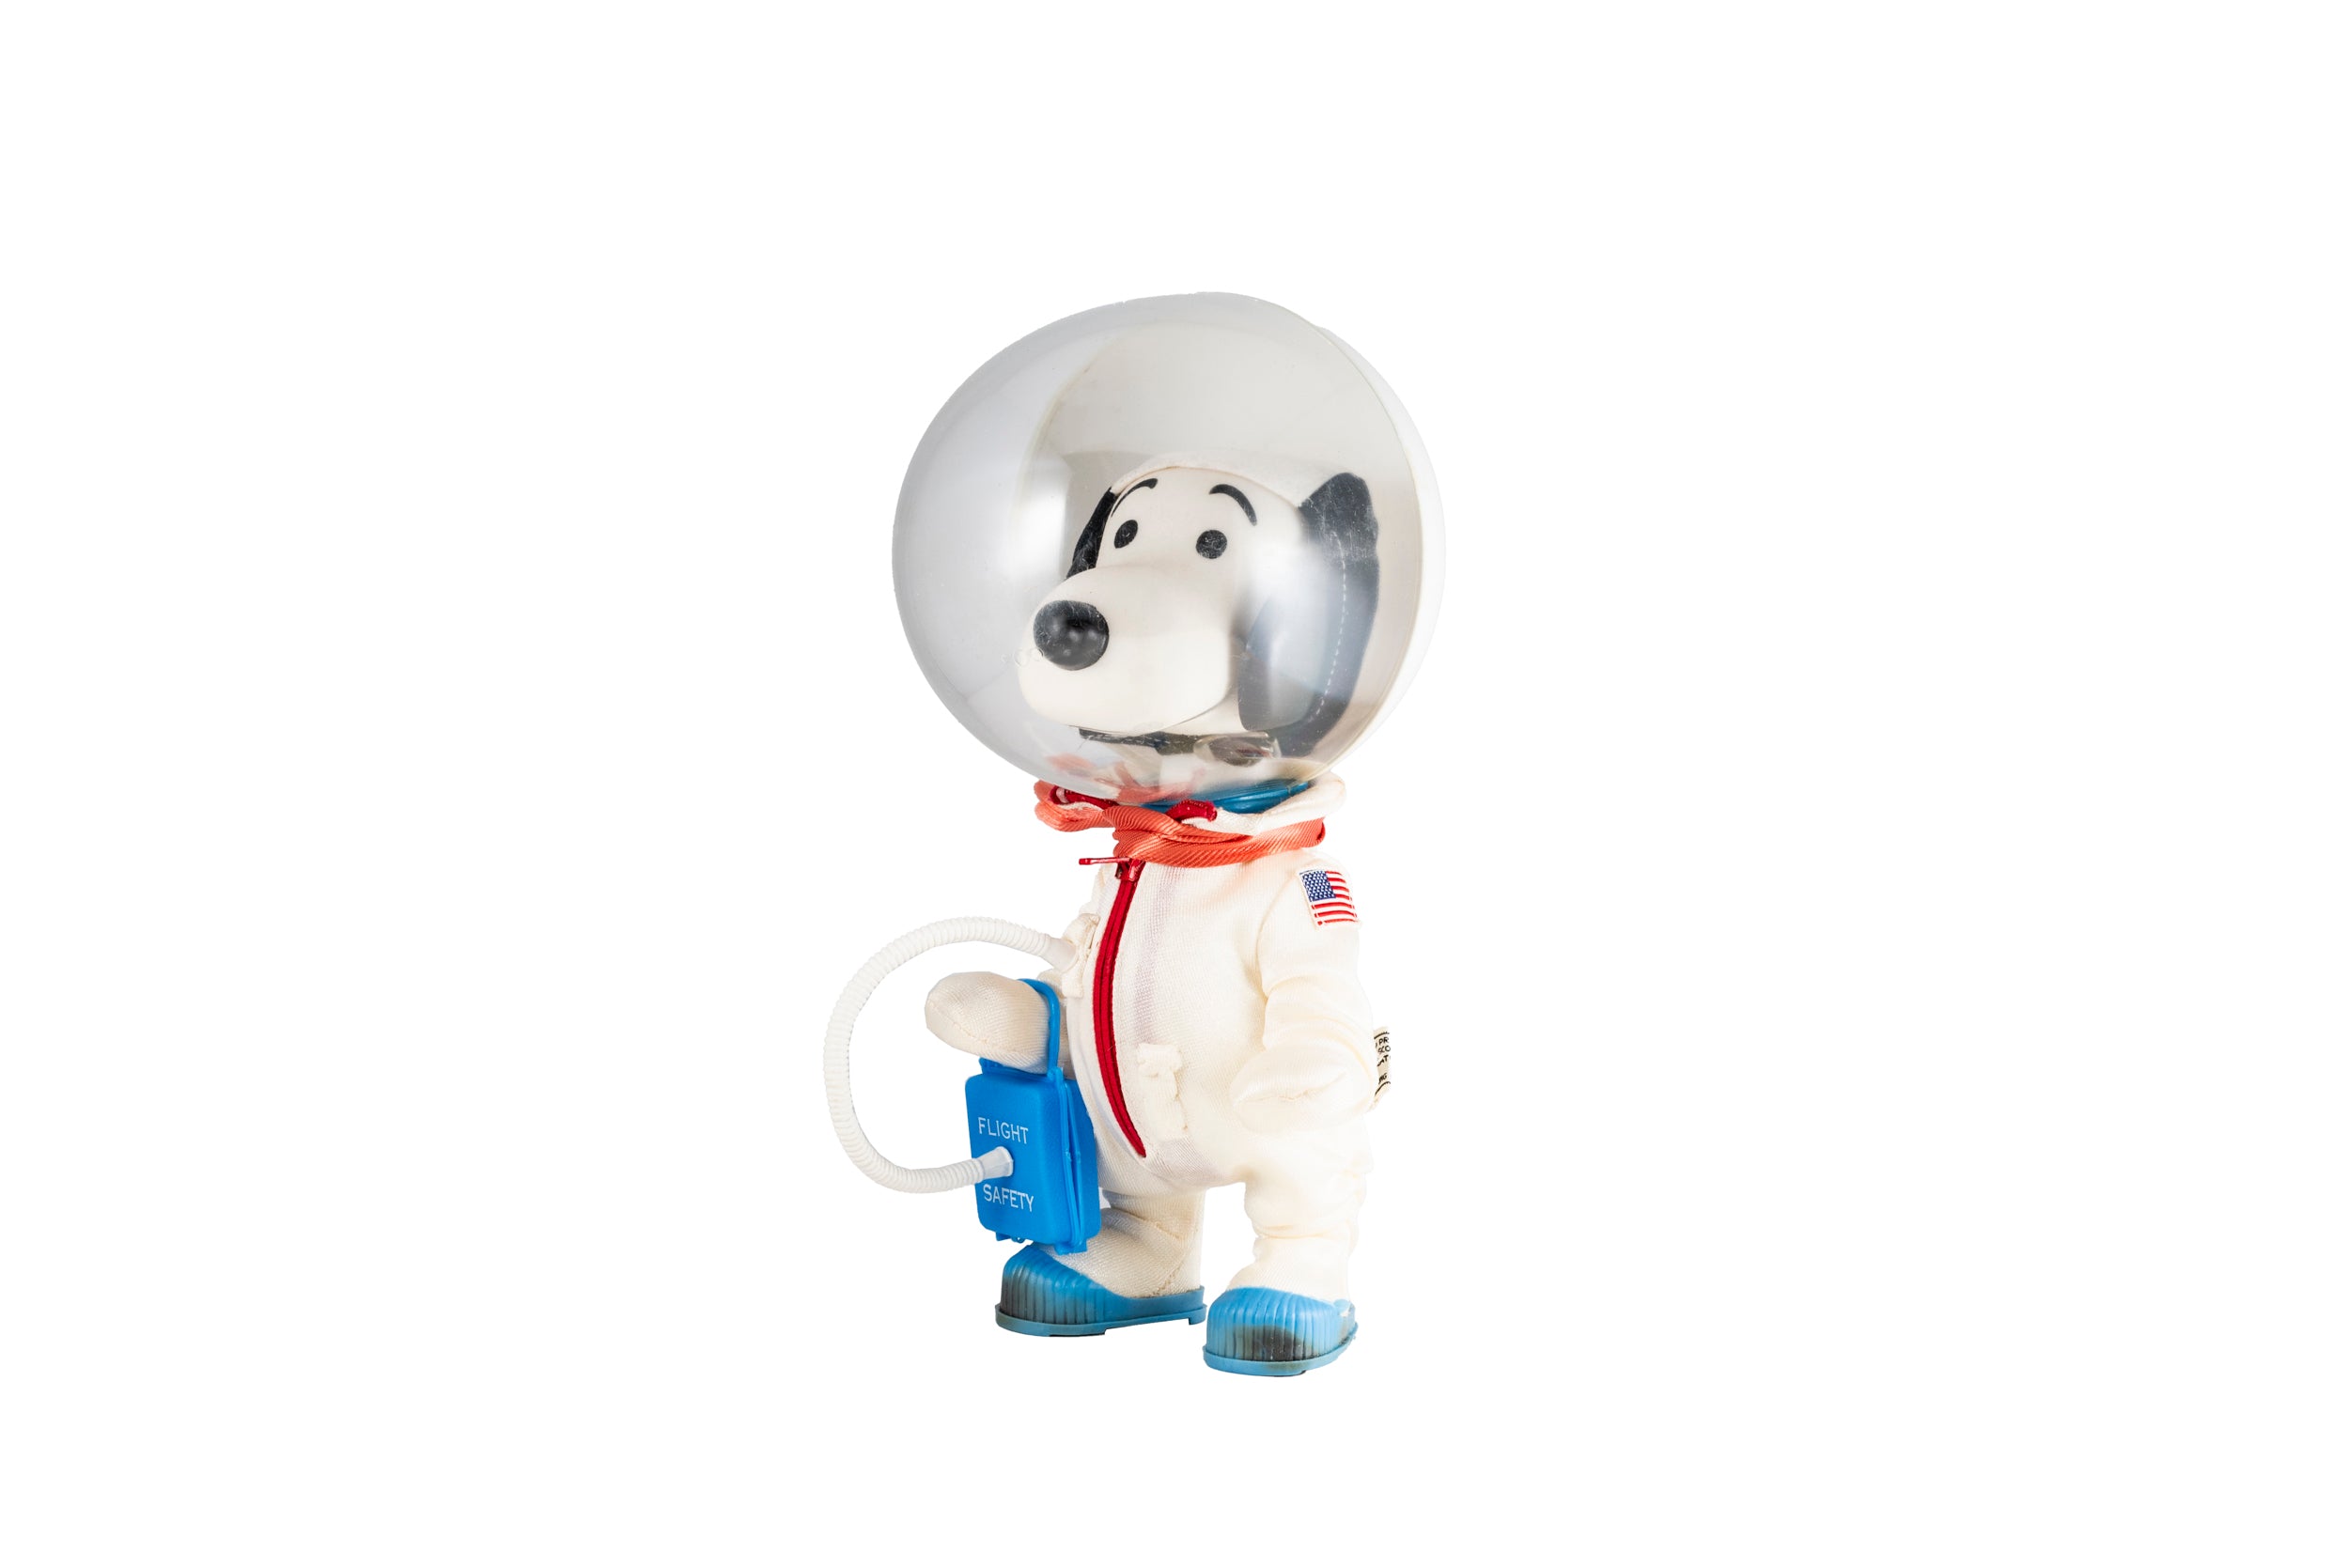 Snoopy 'Astronaut' Doll With Box – Analog:Shift